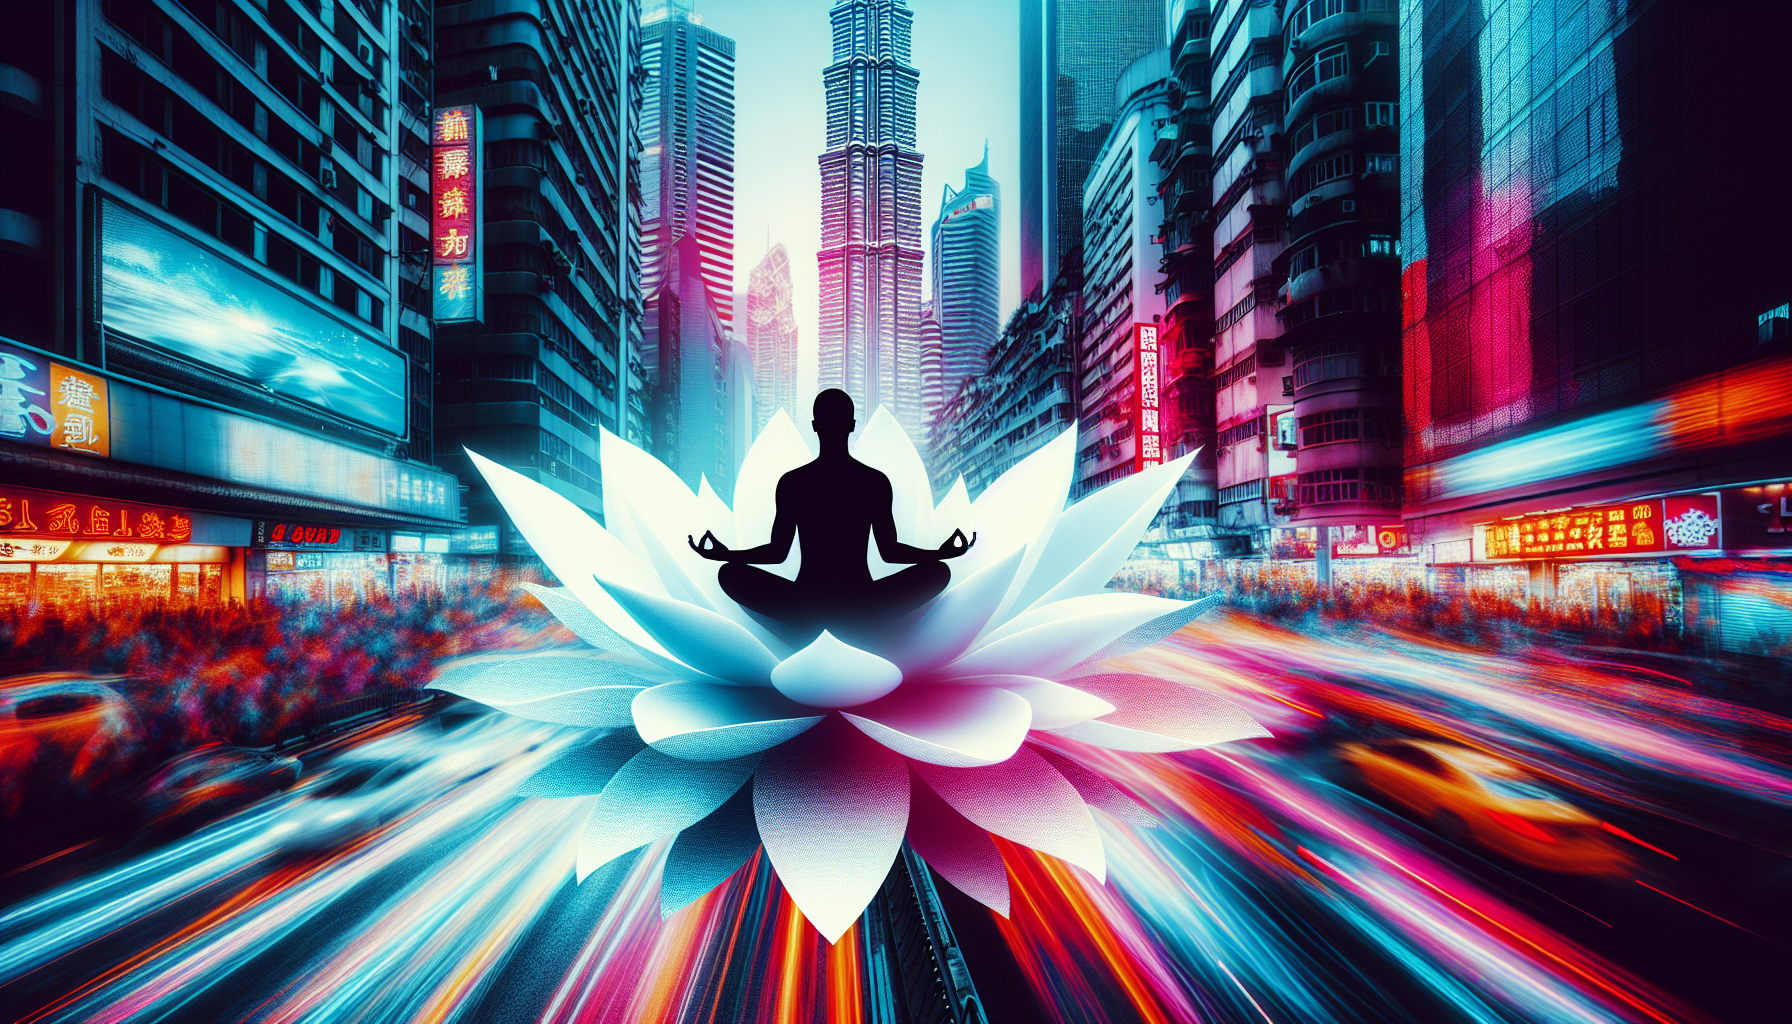 A silhouette meditating peacefully on a blooming lotus flower, surrounded by the chaos of city life.